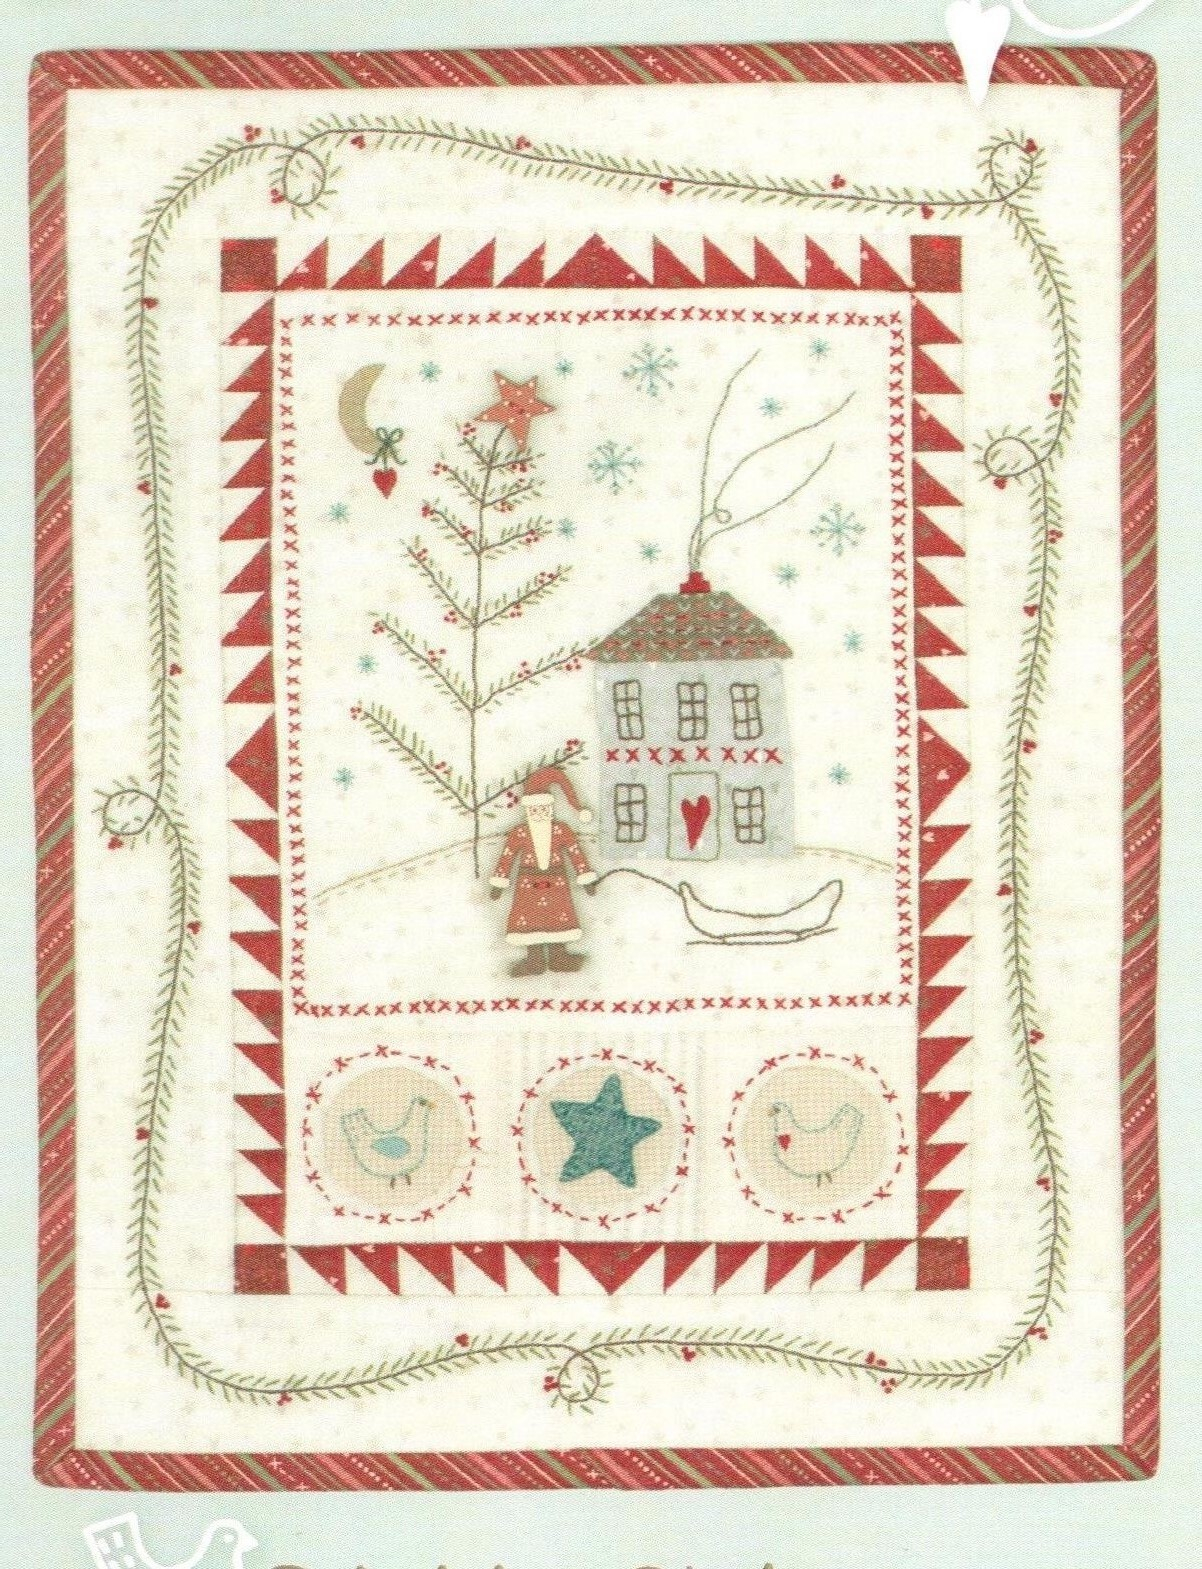 Hand Embroidery Patterns For Quilts Primitive Christmas Quilt And Embroidery Pattern With Hand Painted Jolly Santa Button Pack